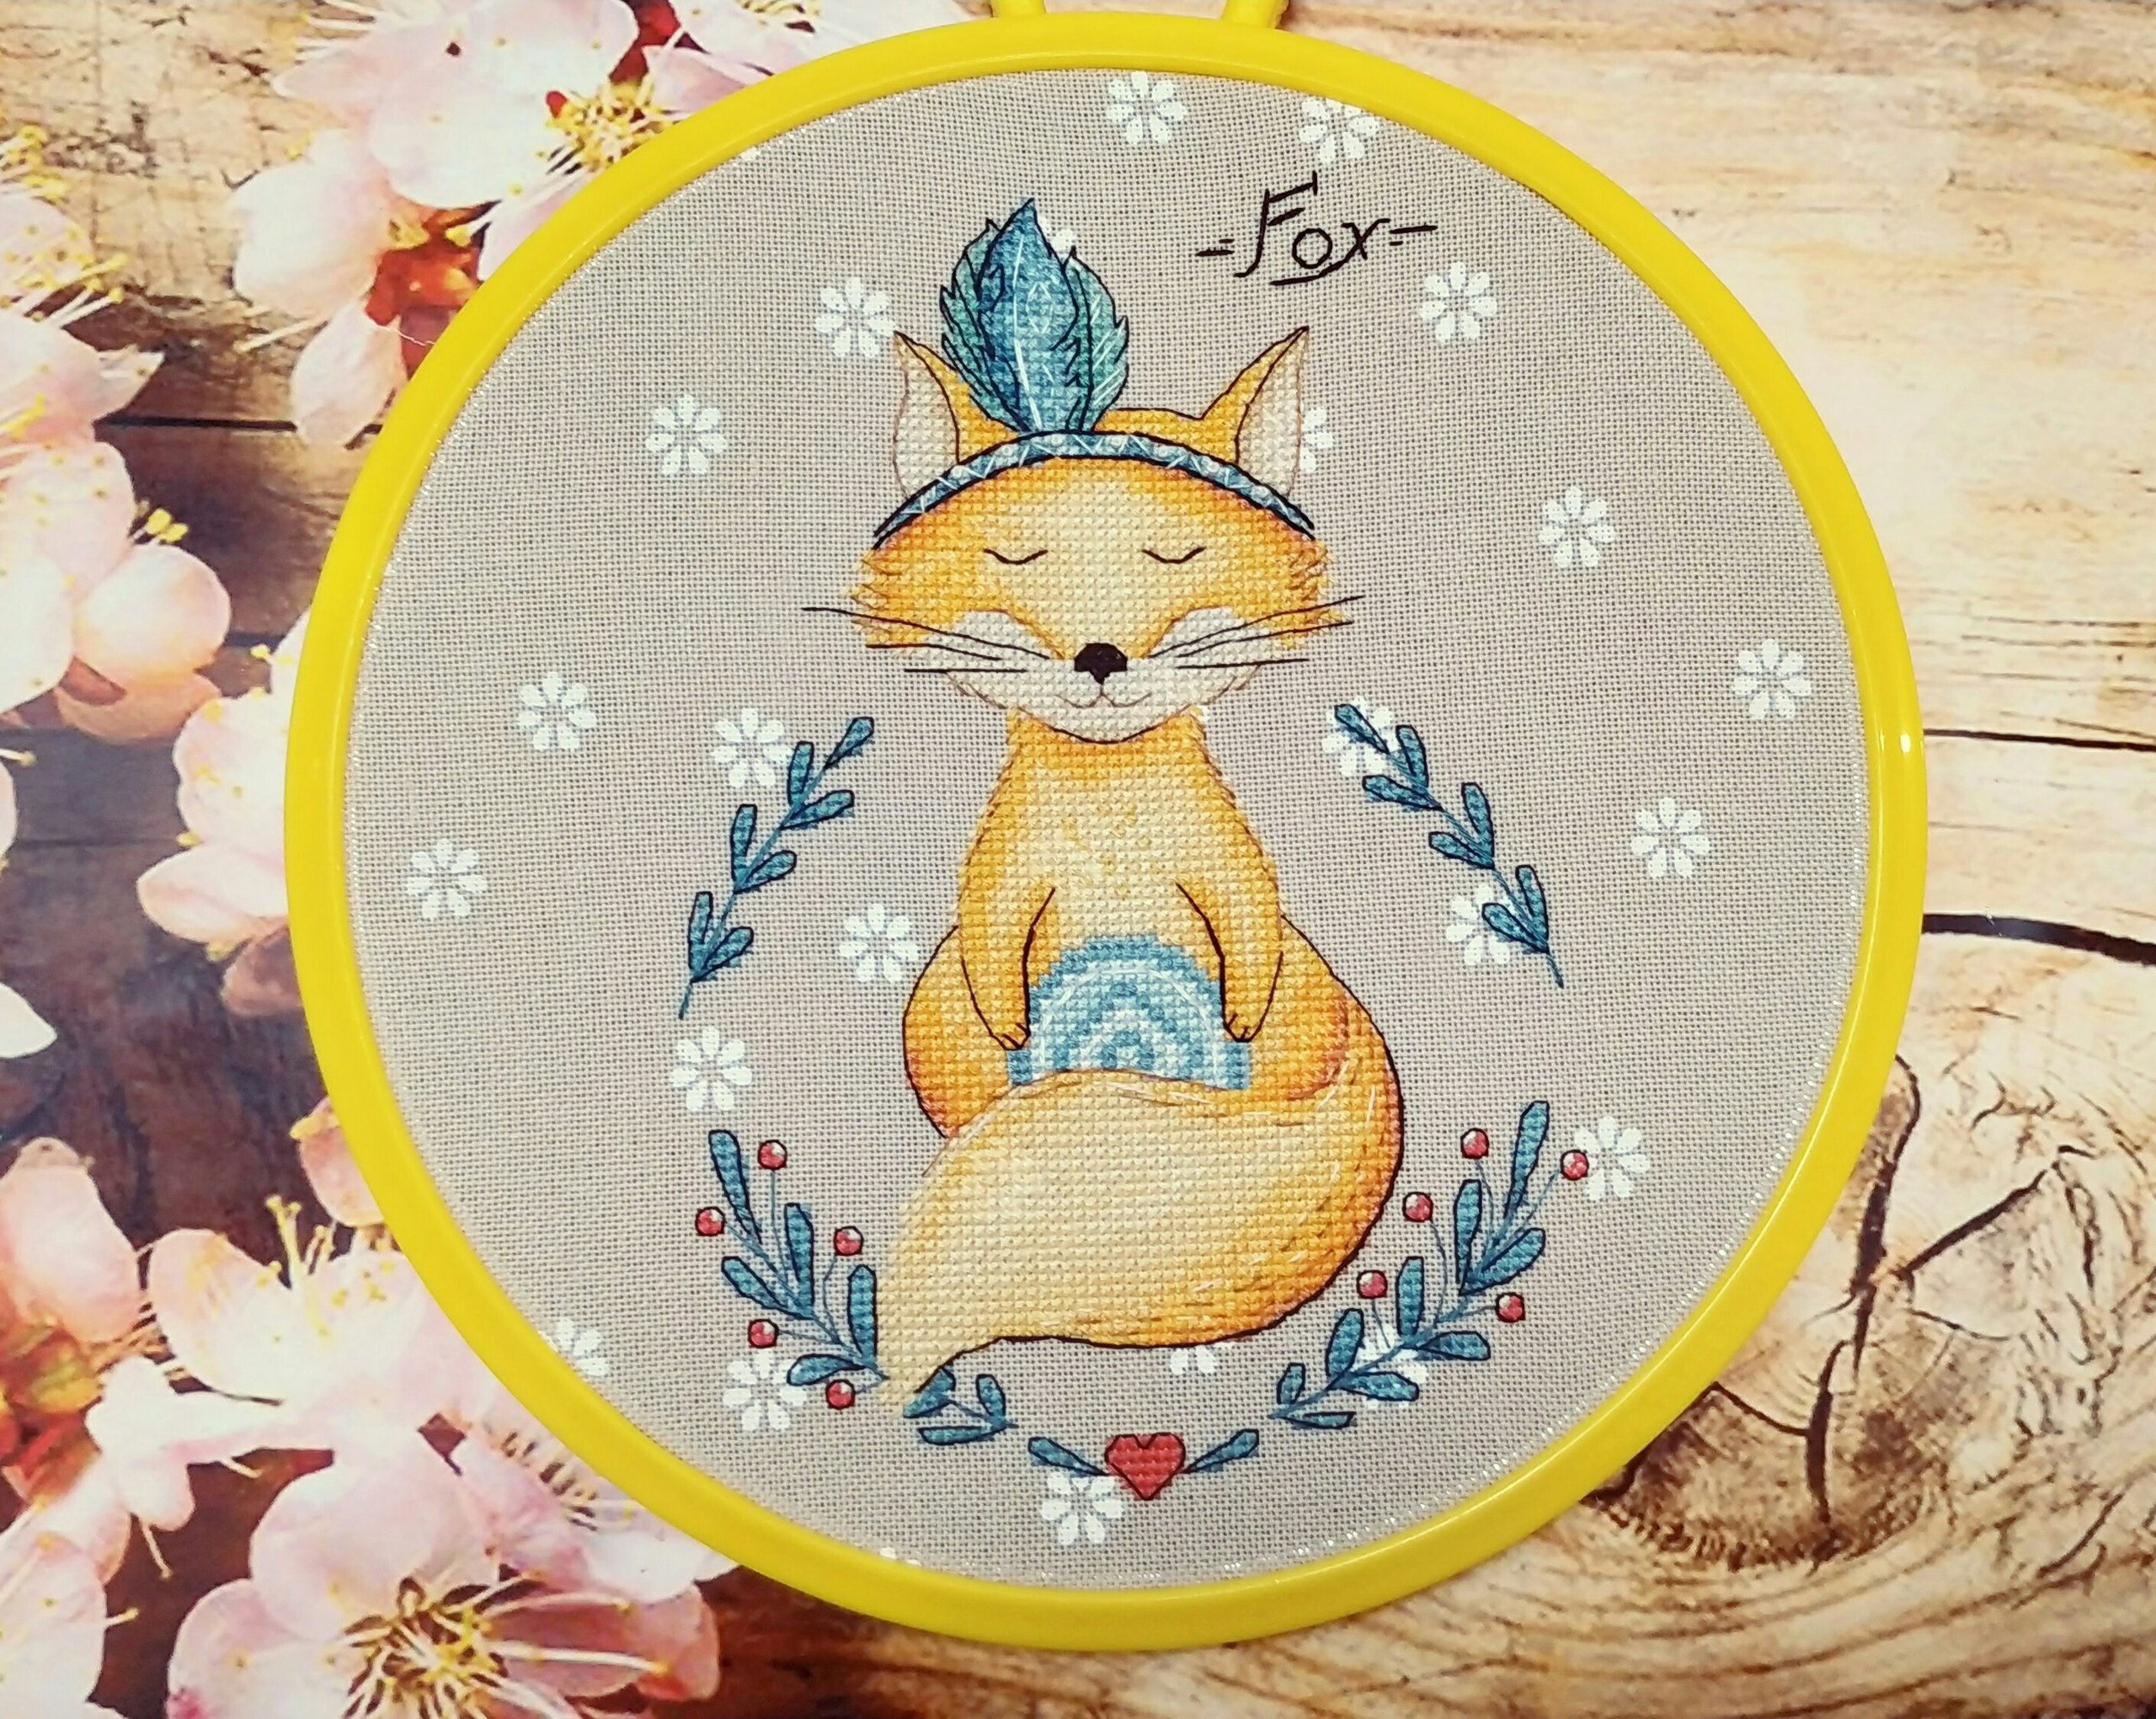 Primitive Hand Embroidery Patterns Yoga Cross Stitch Primitive Fox Cross Stitch Patterns Pdf Meditation Cross Stitch Hand Embroidery Patterns Pdf Embroidery Beginner